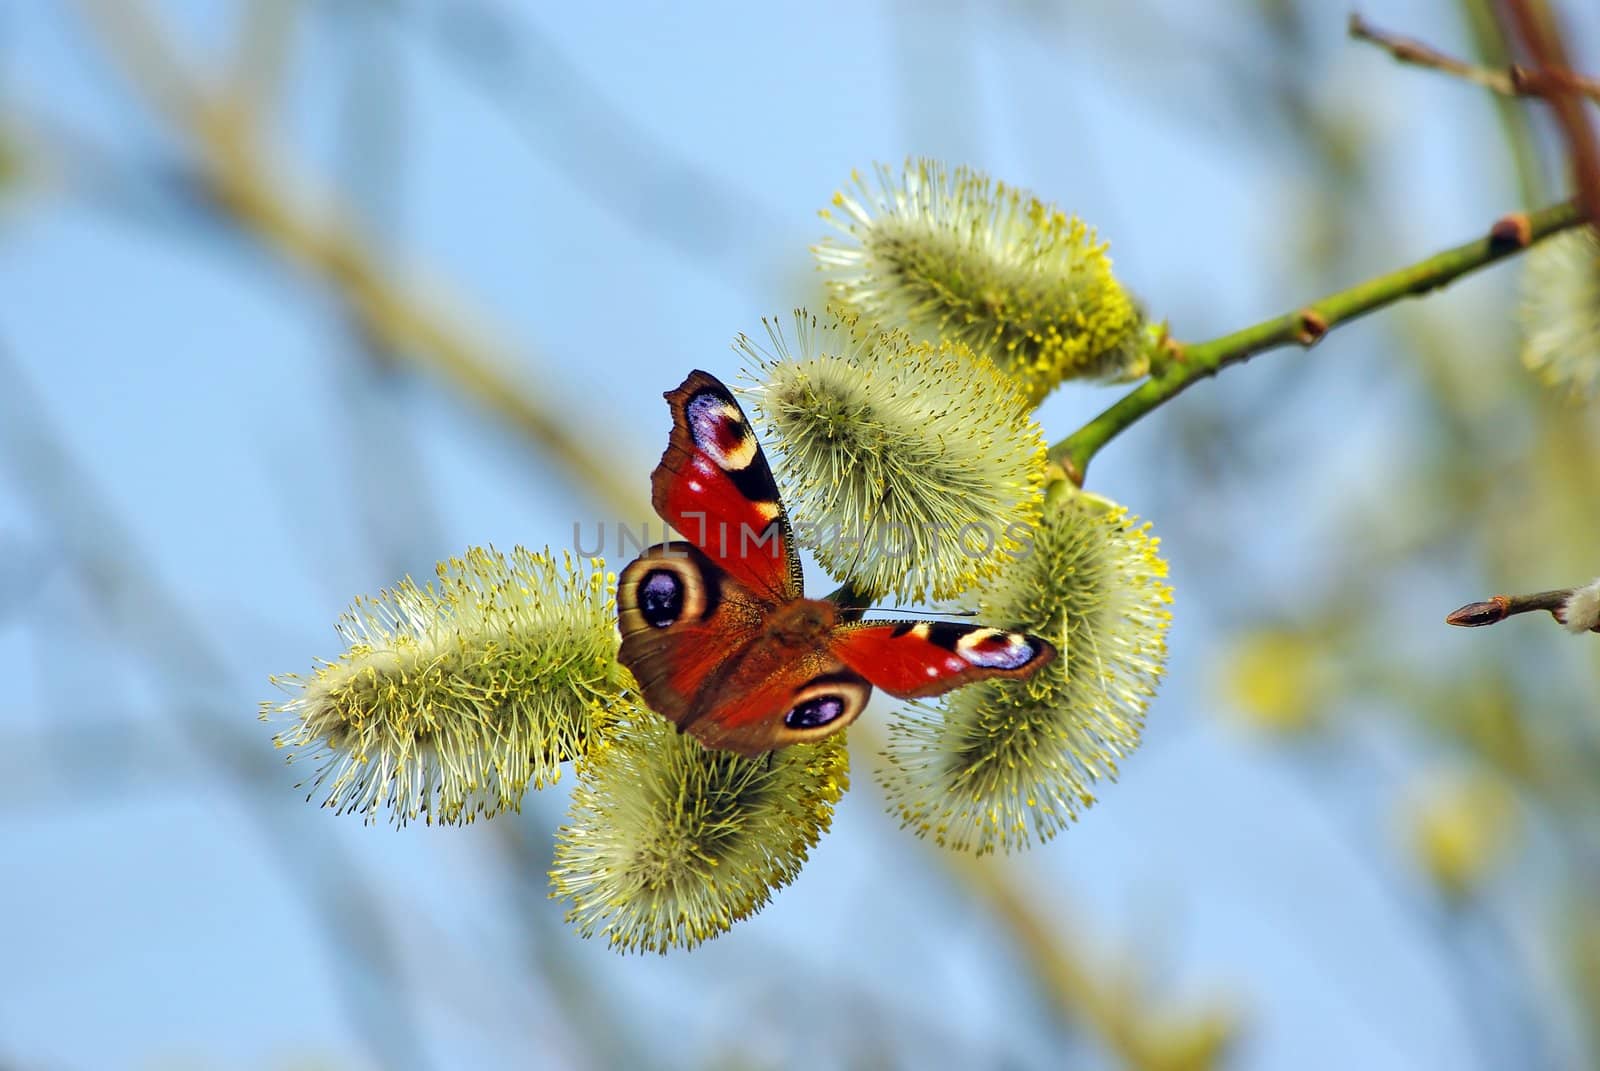 Butterfly on the willow flower by Vitamin